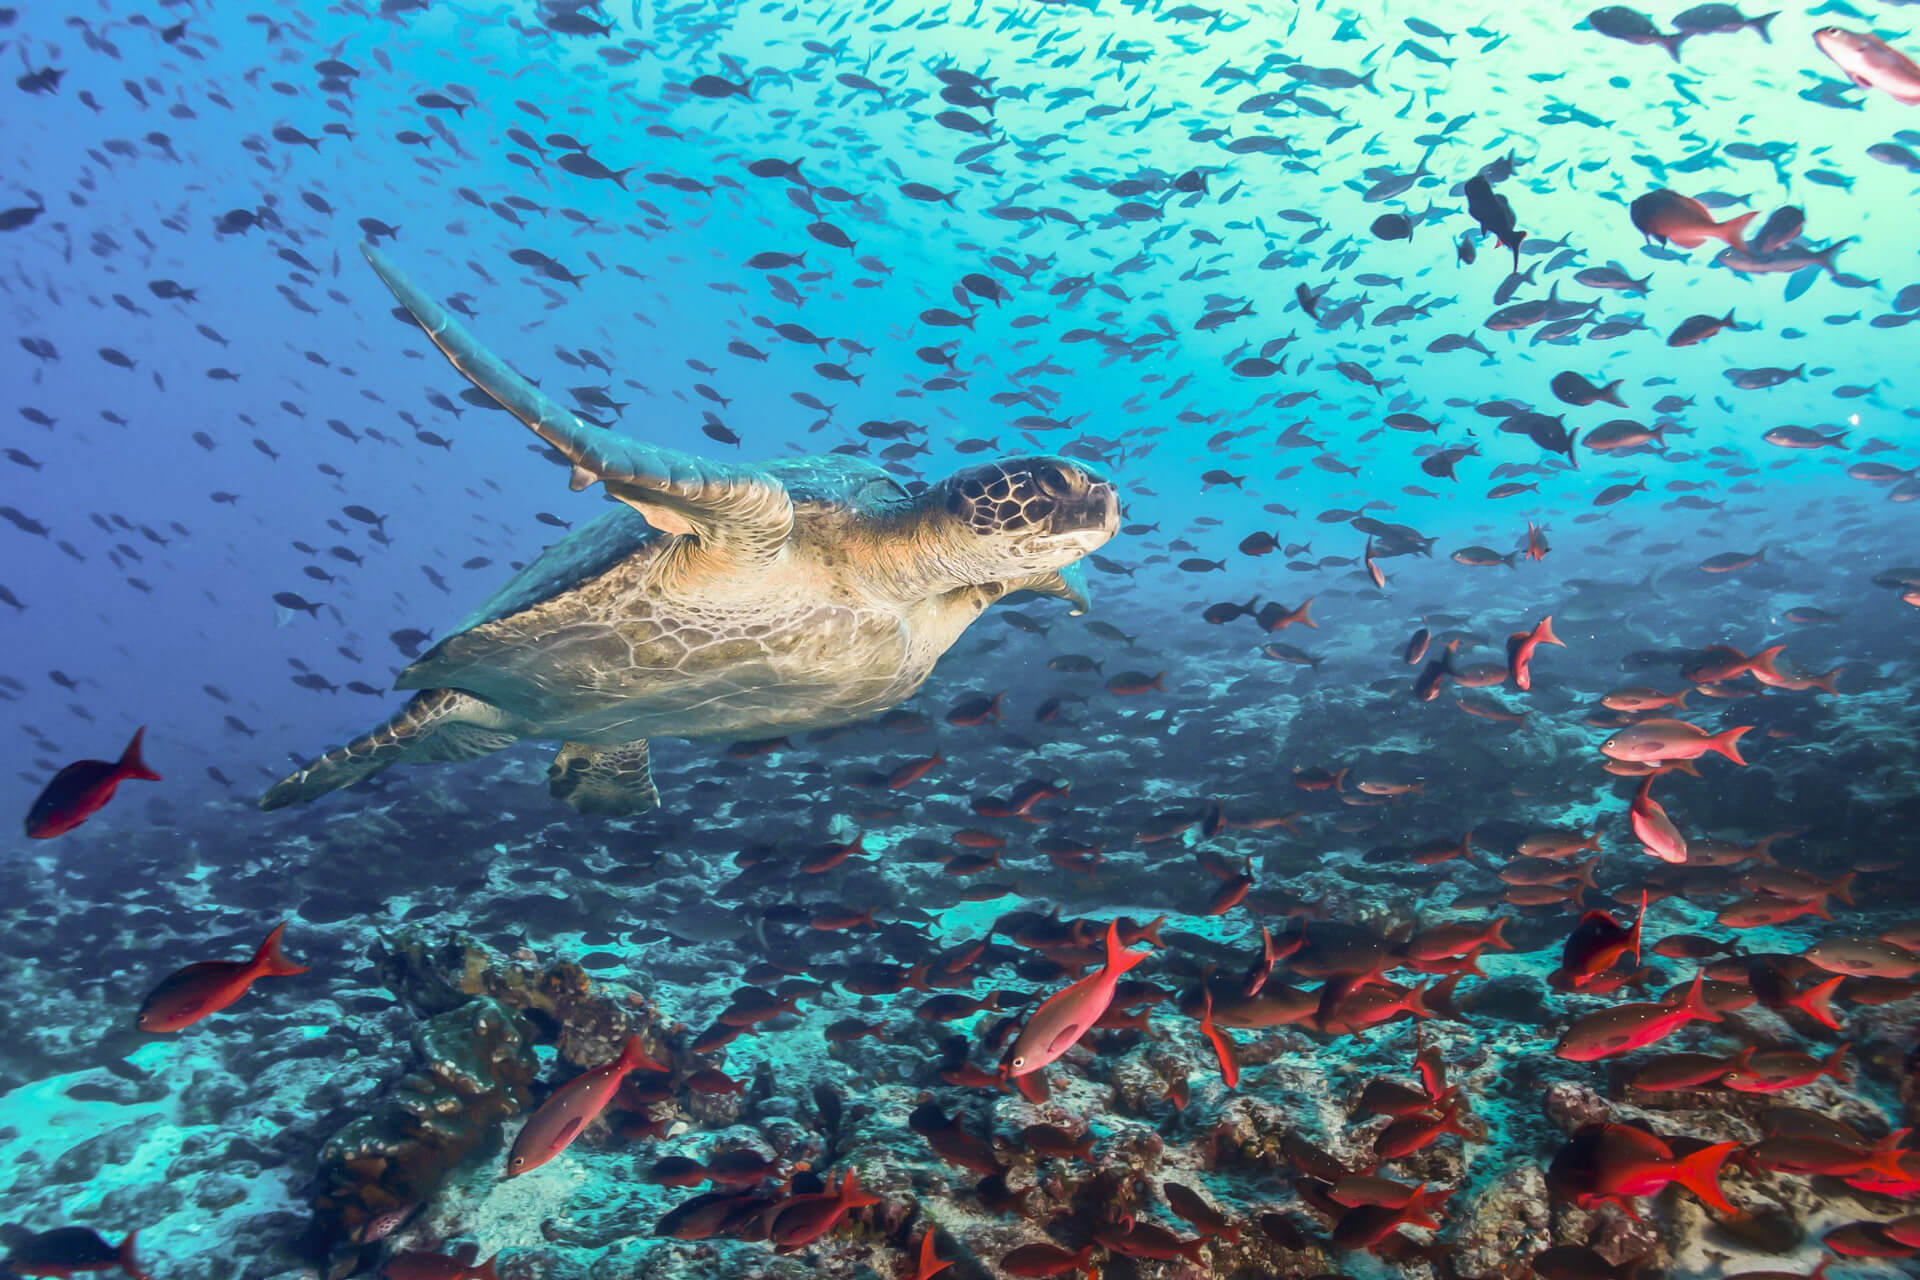 Sea turtle swimming surrounded by tropical red fish during private diving excursion in Galapagos Islands